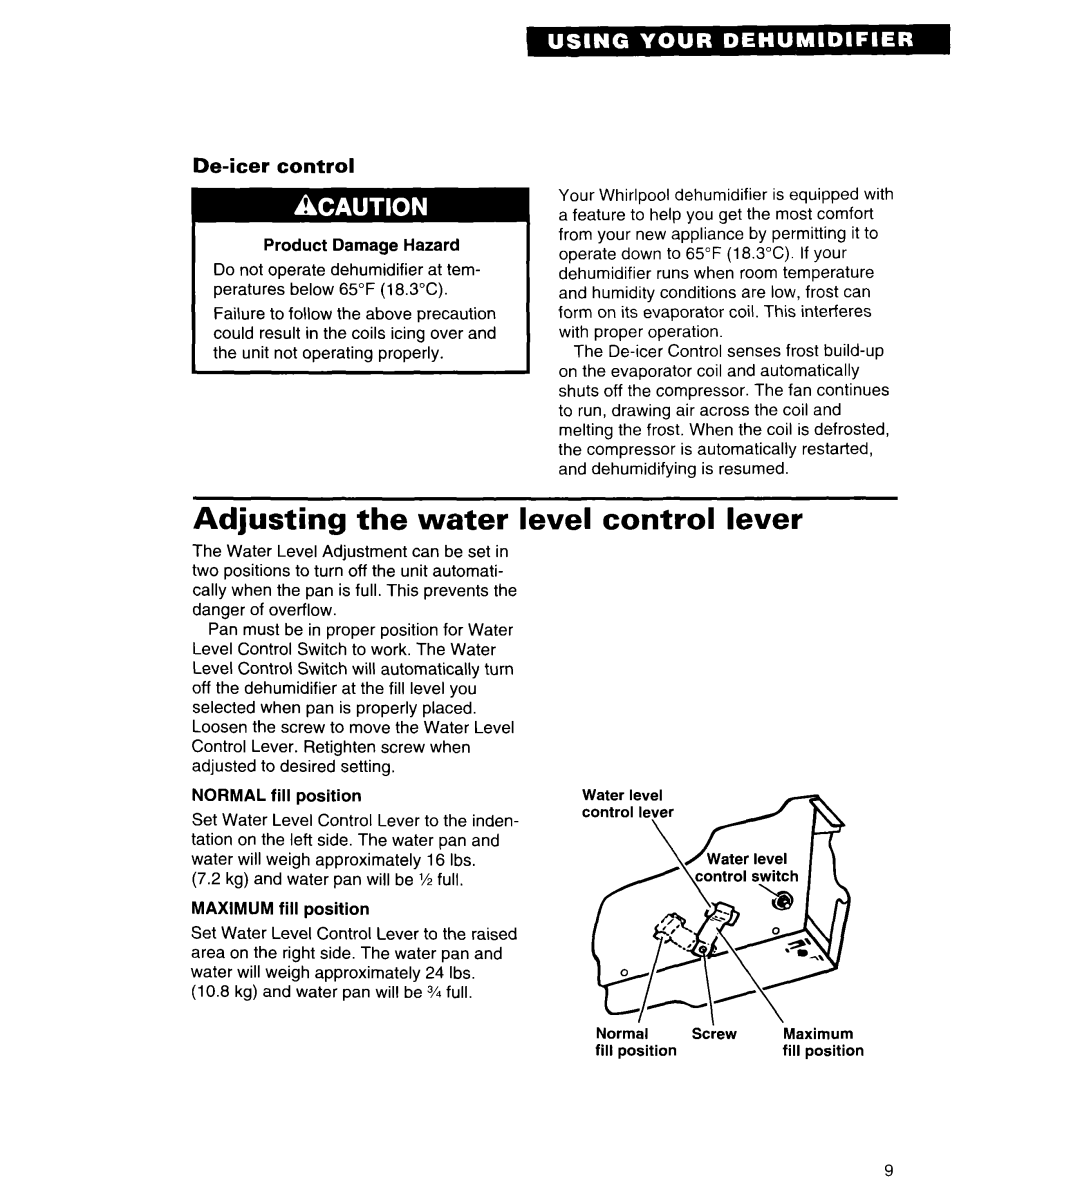 Whirlpool AD050, ADO25, AD040, AD030 important safety instructions Adjusting the water level control lever, De-icercontrol 